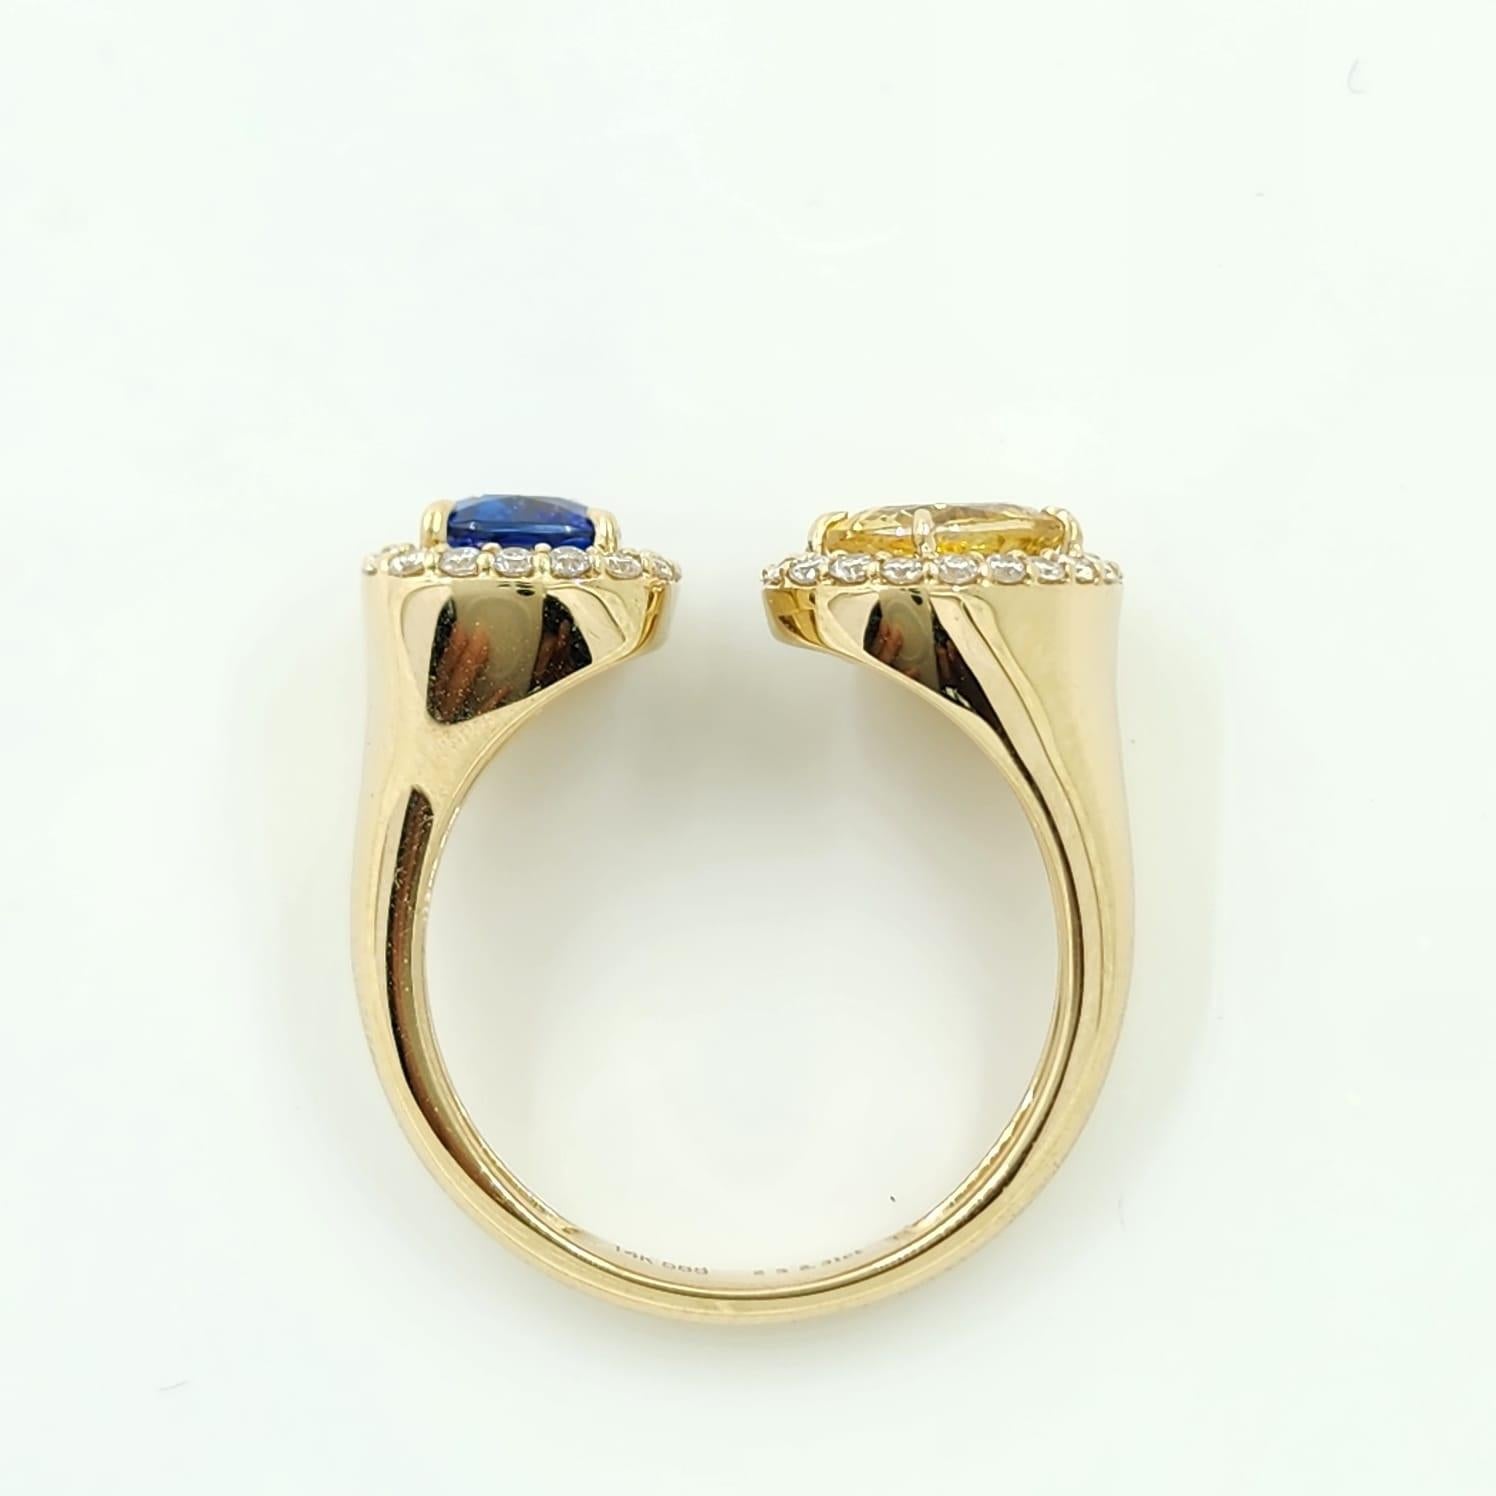 Contemporary 2.31Ct Yellow and Blue Sapphire Diamond Toi Et Moi Ring in 14k Yellow Gold For Sale